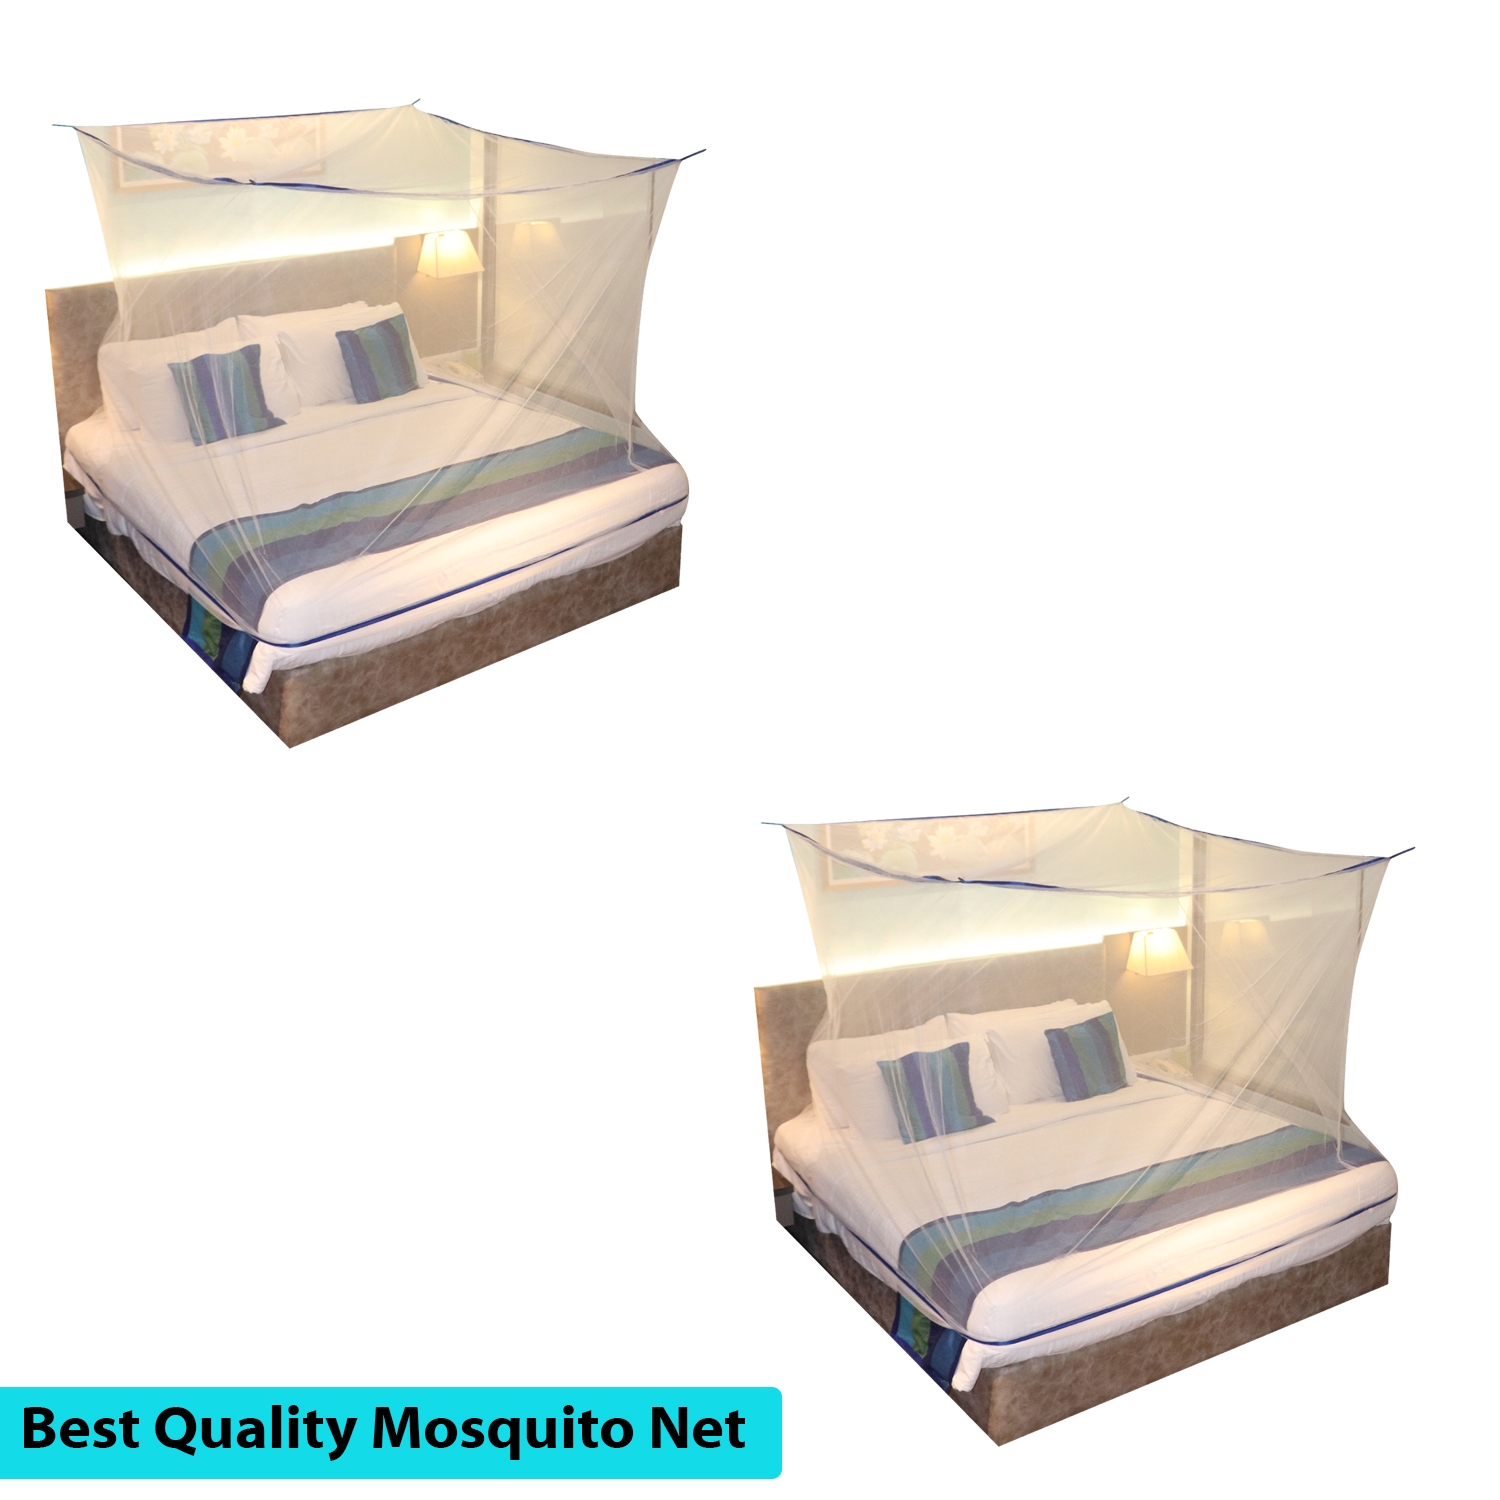 SILVER SHINE | Mosquito Net for Double Bed, King-Size, Square Hanging Foldable Polyester Net White And BluePack of 2 0